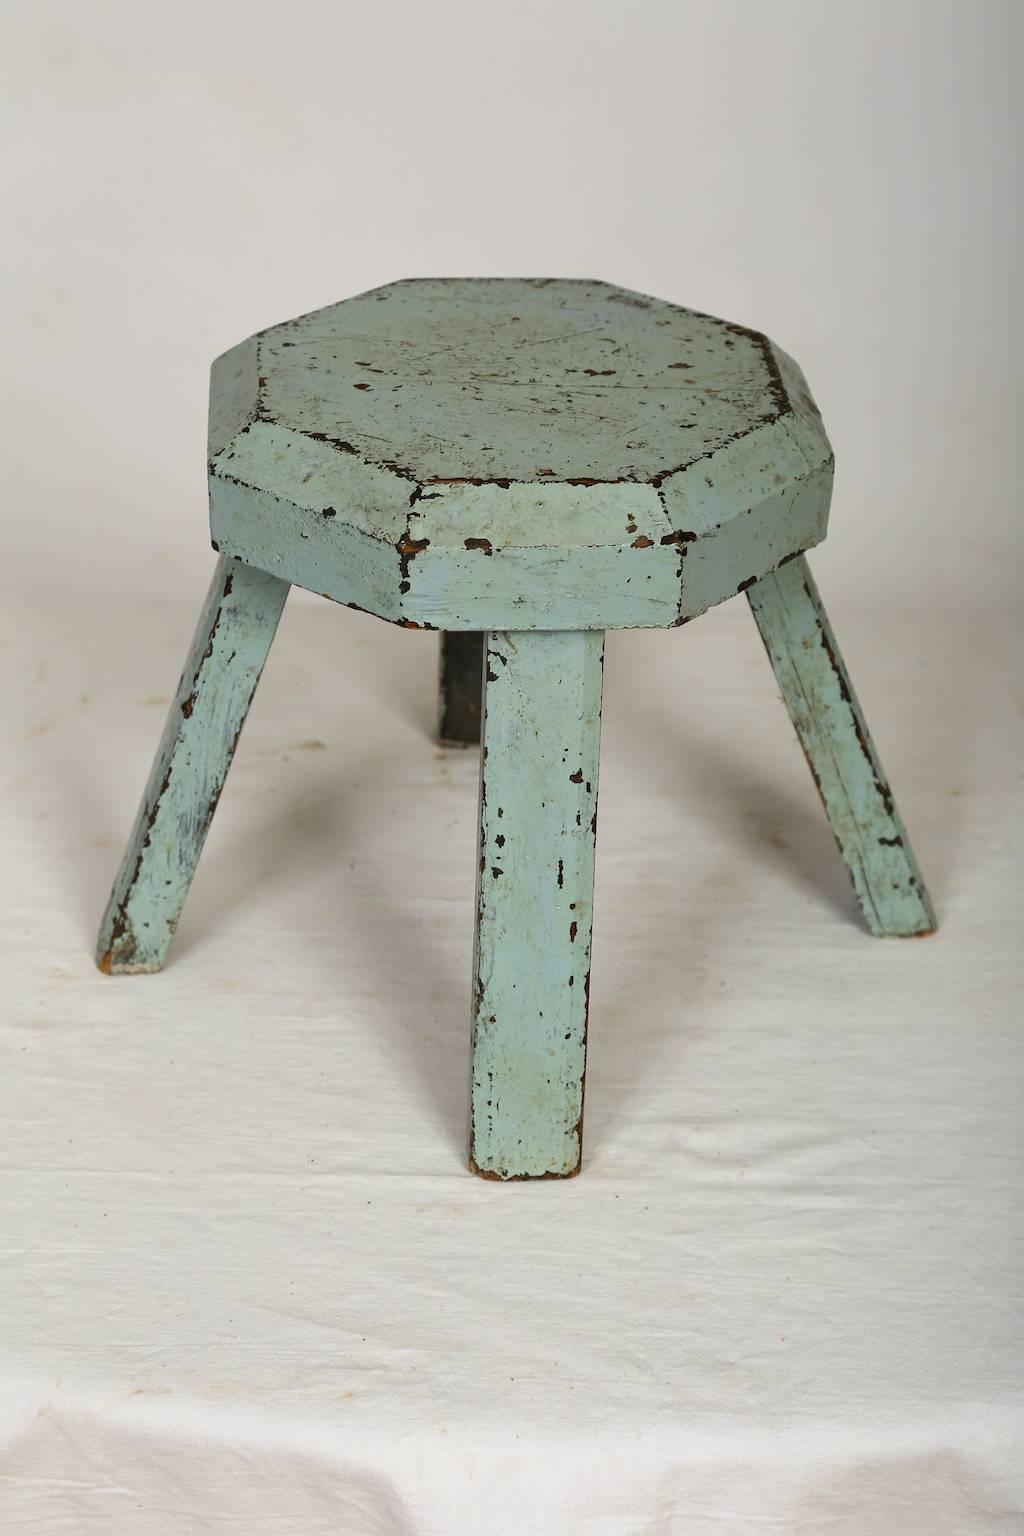 This is a small charming and very robust milking stool. Probably made locally on the farm where it was used. Most likely made of pine. The stool have a very nice and lovely patina from being used in the everyday work at the farm.